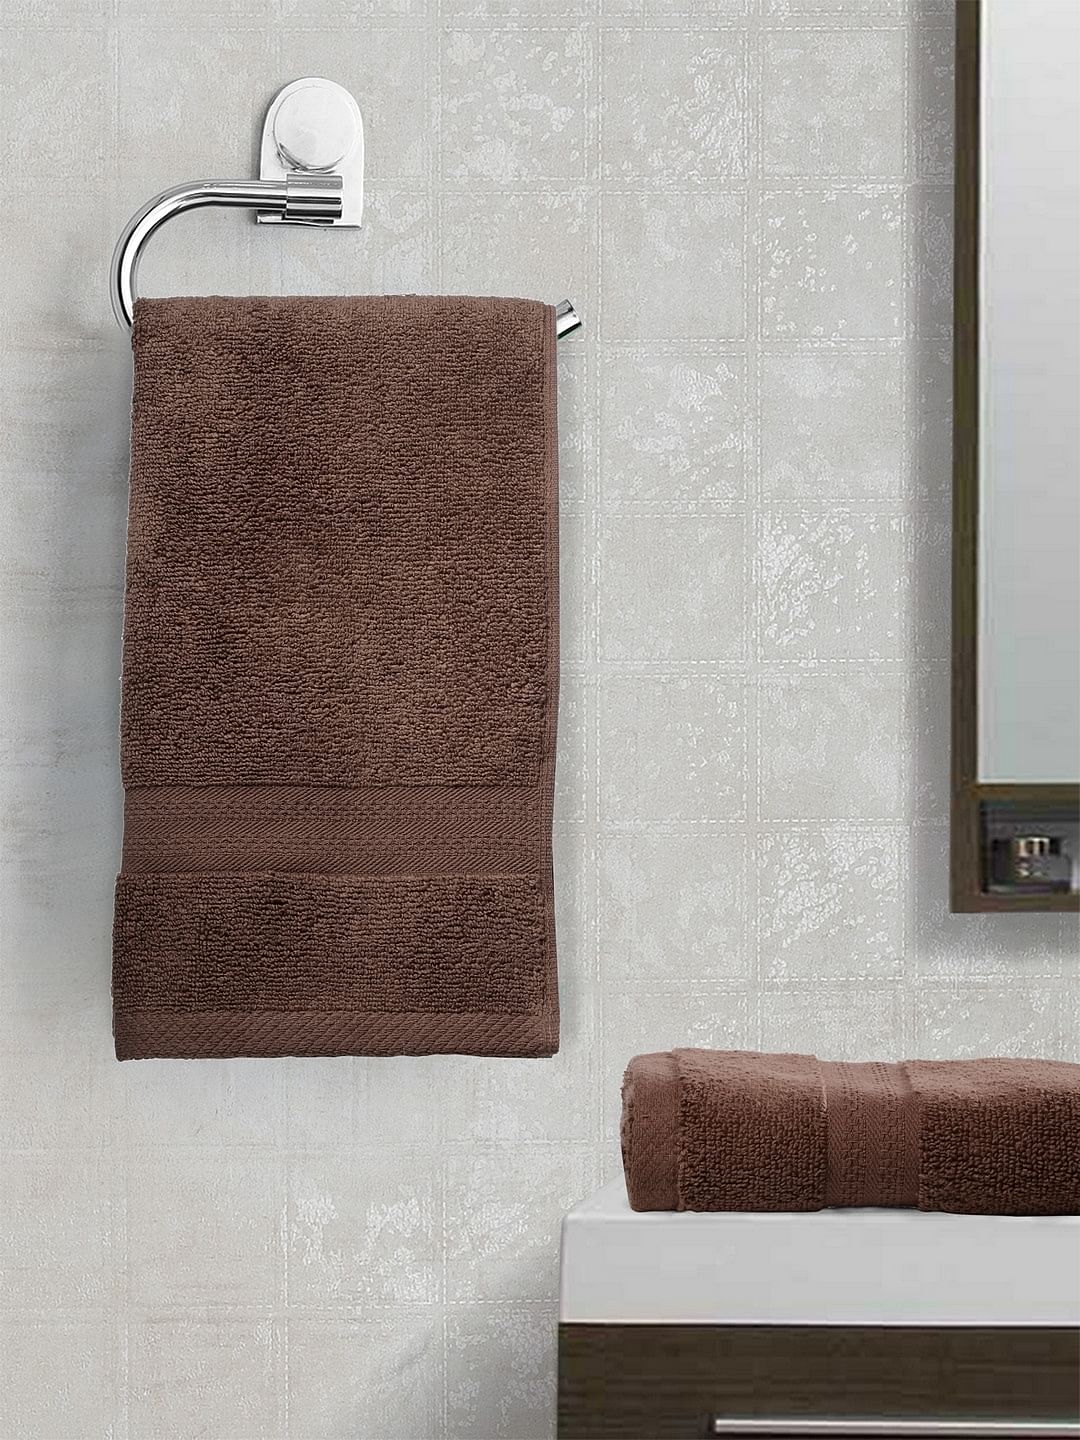 Paradiso Cotton Set Of 2 Hand Towel 40X60 Cm 500 Gsm in Chocolate Colour